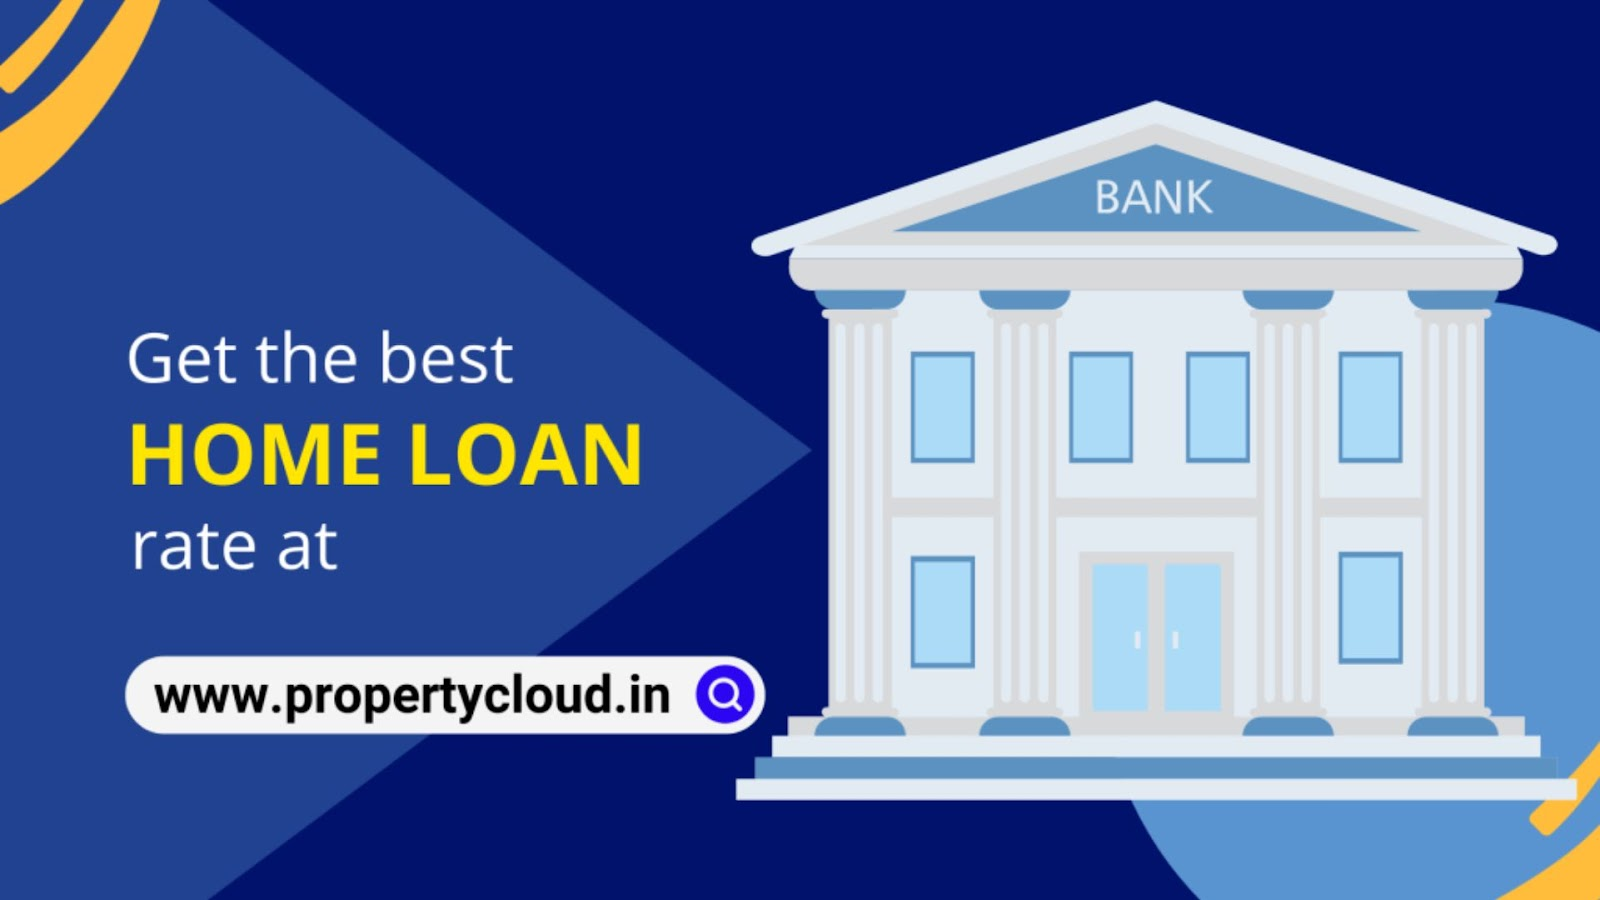 Contact PropertyCloud's loan experts for the best financial and legal help.